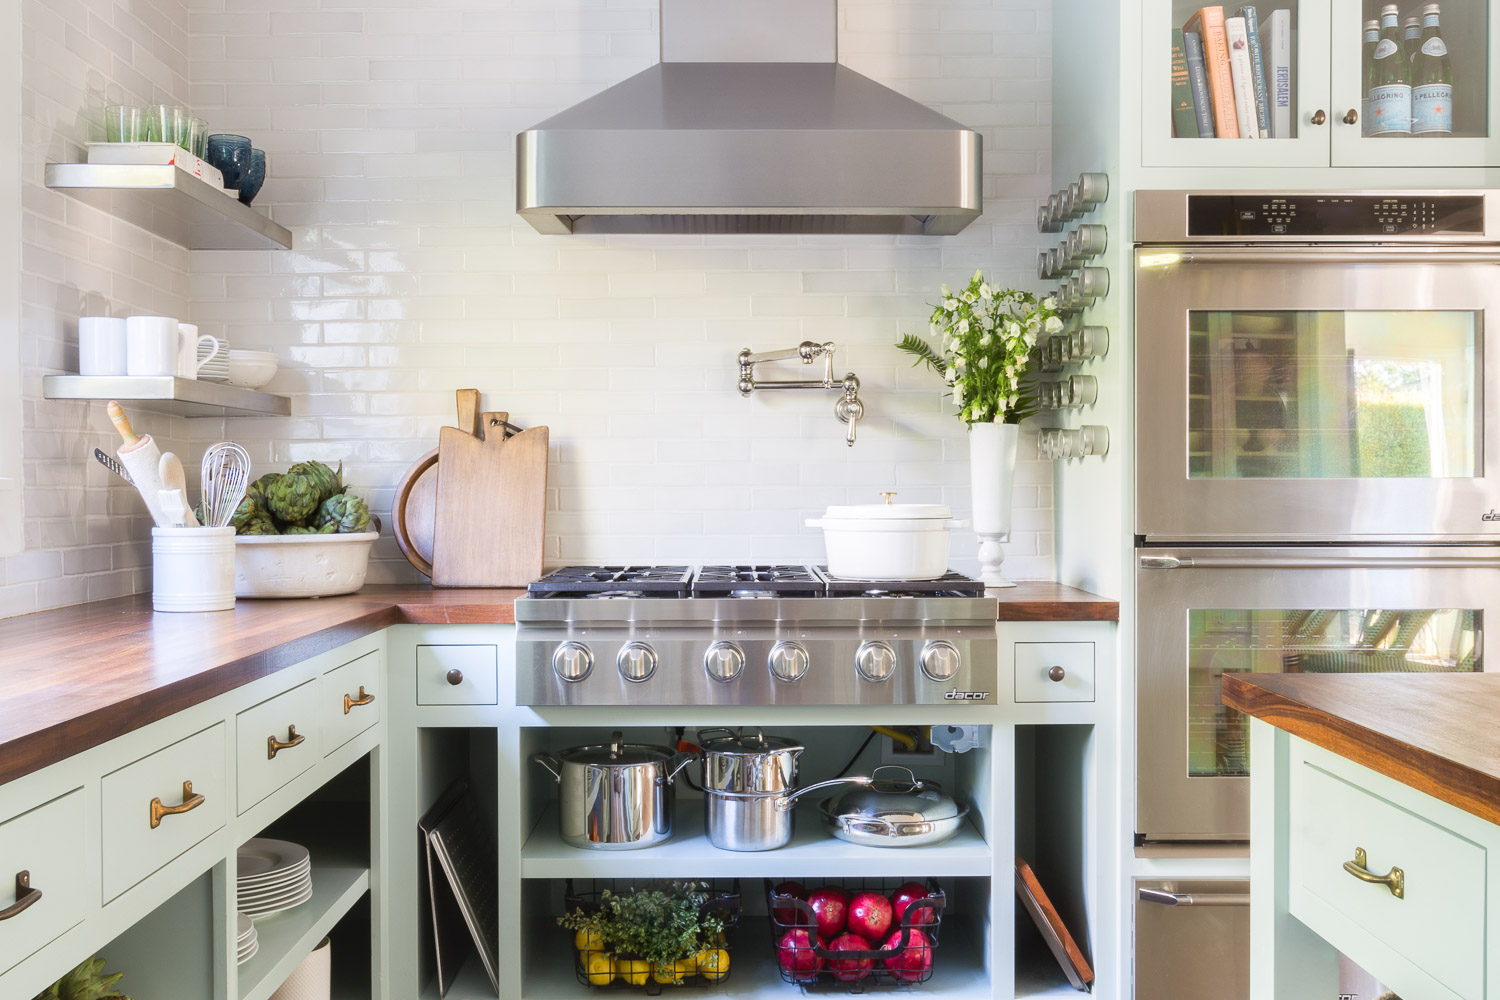 simple sophistication and laid back luxury in this mint kitchen by Taylor Anne Design